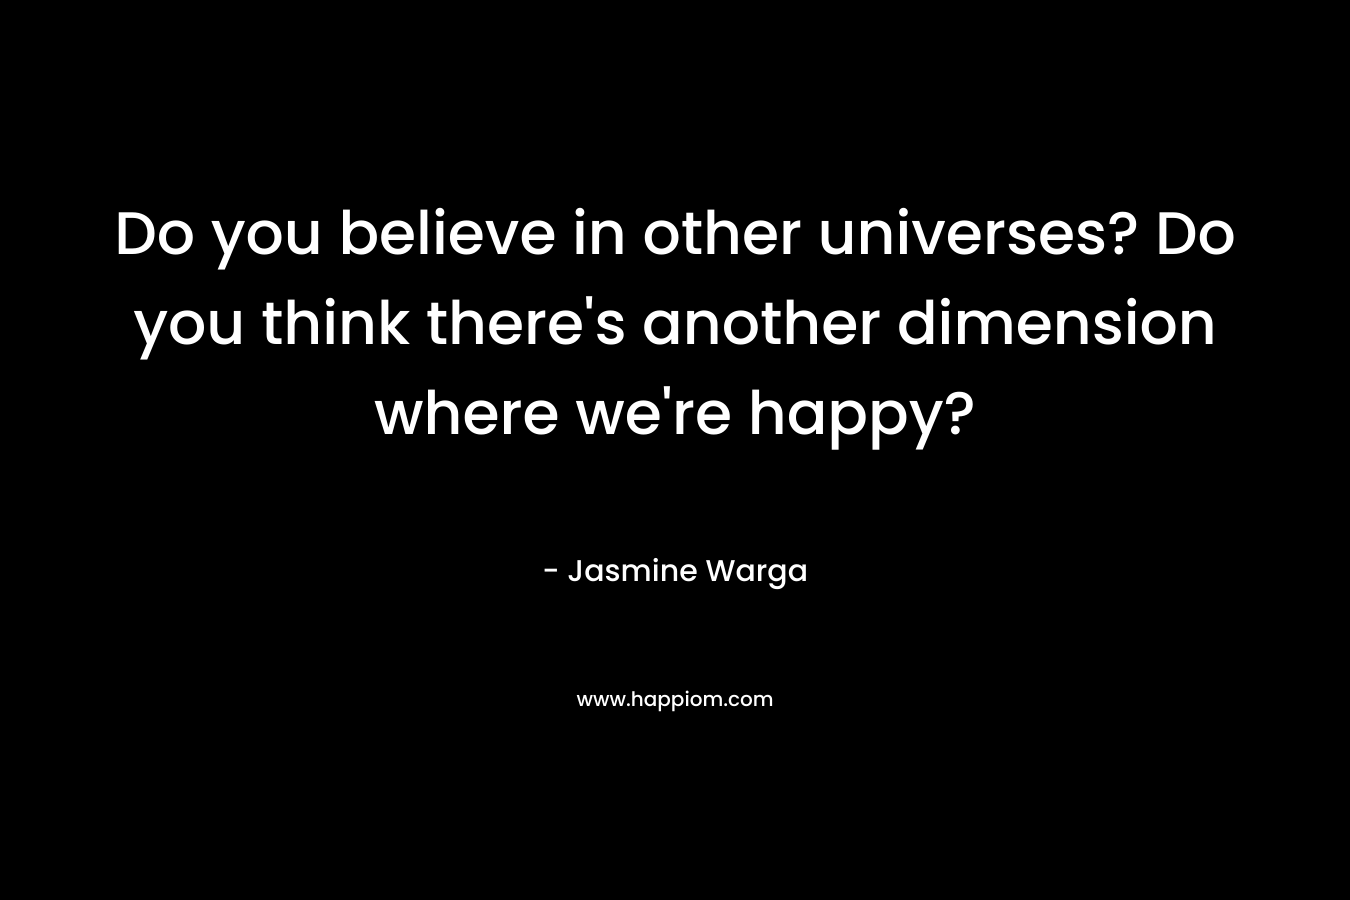 Do you believe in other universes? Do you think there's another dimension where we're happy?